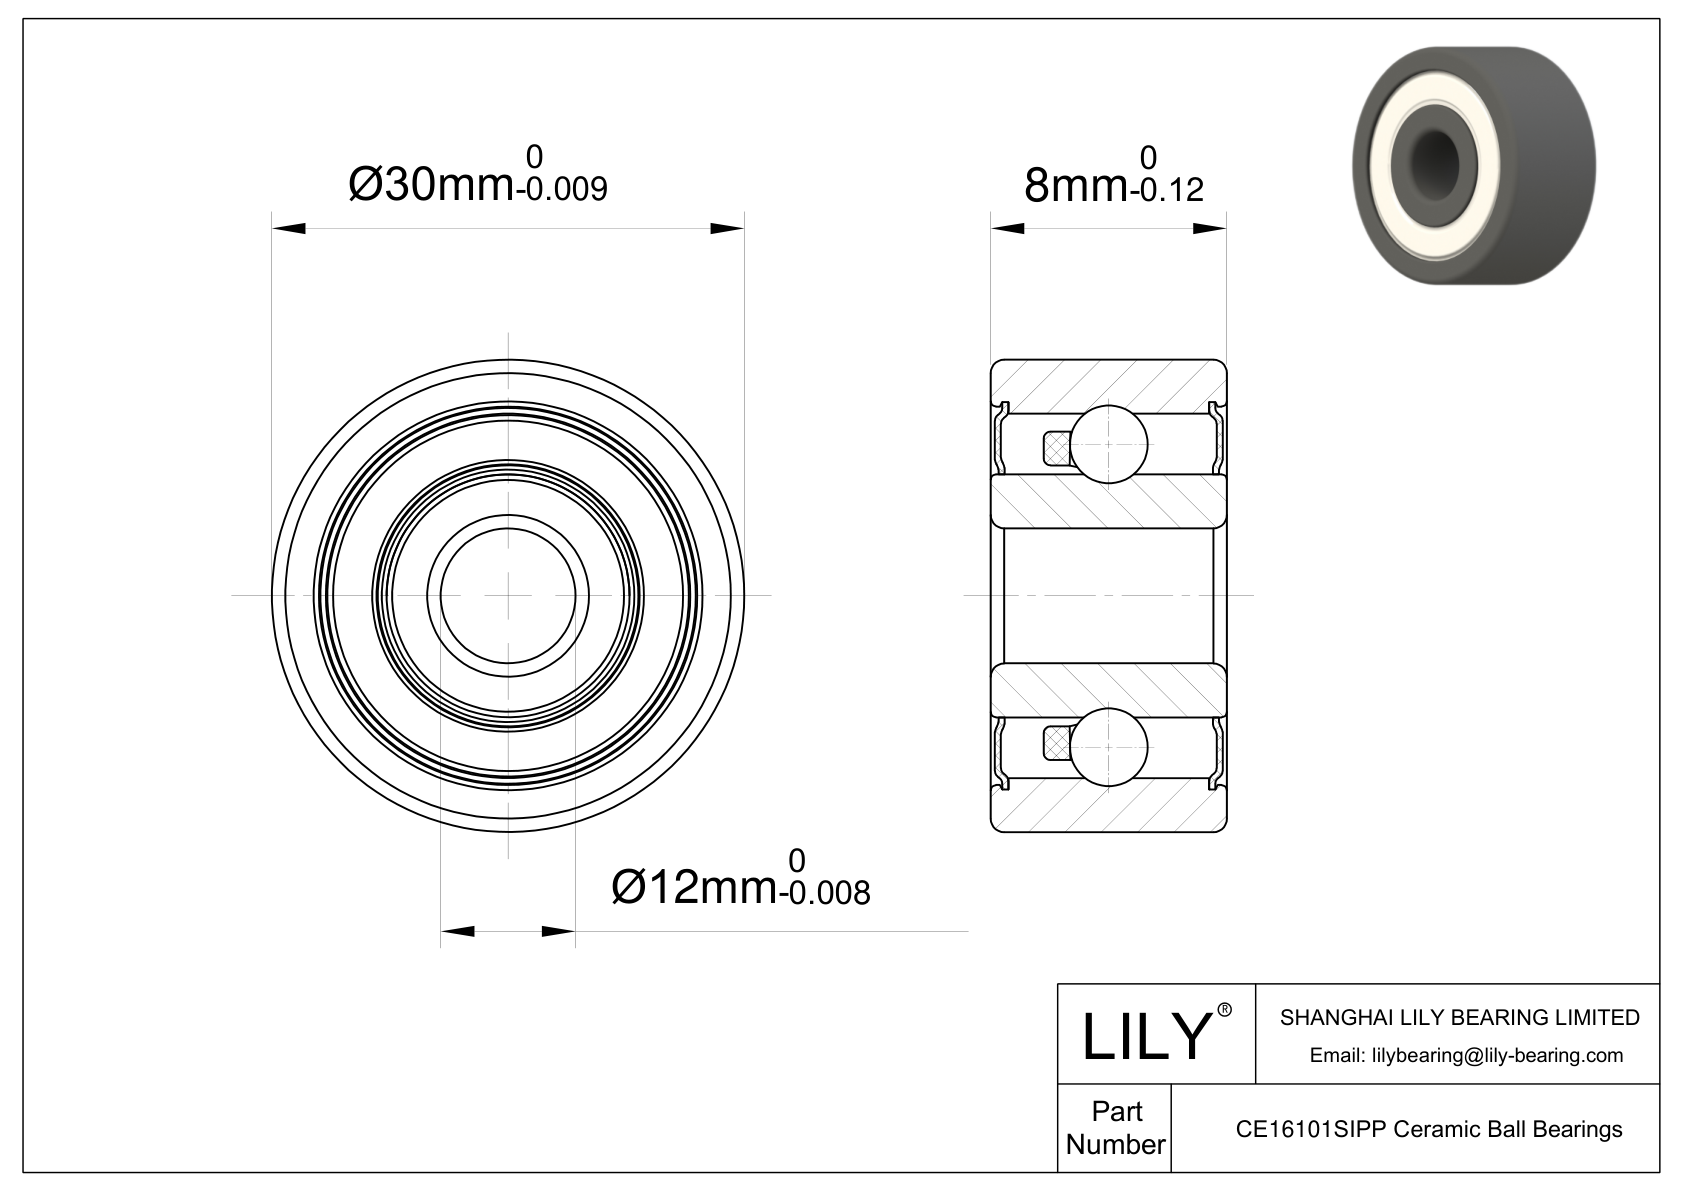 CESI 16101 2RS Metric Size Silicon Nitride Ceramic Bearings cad drawing